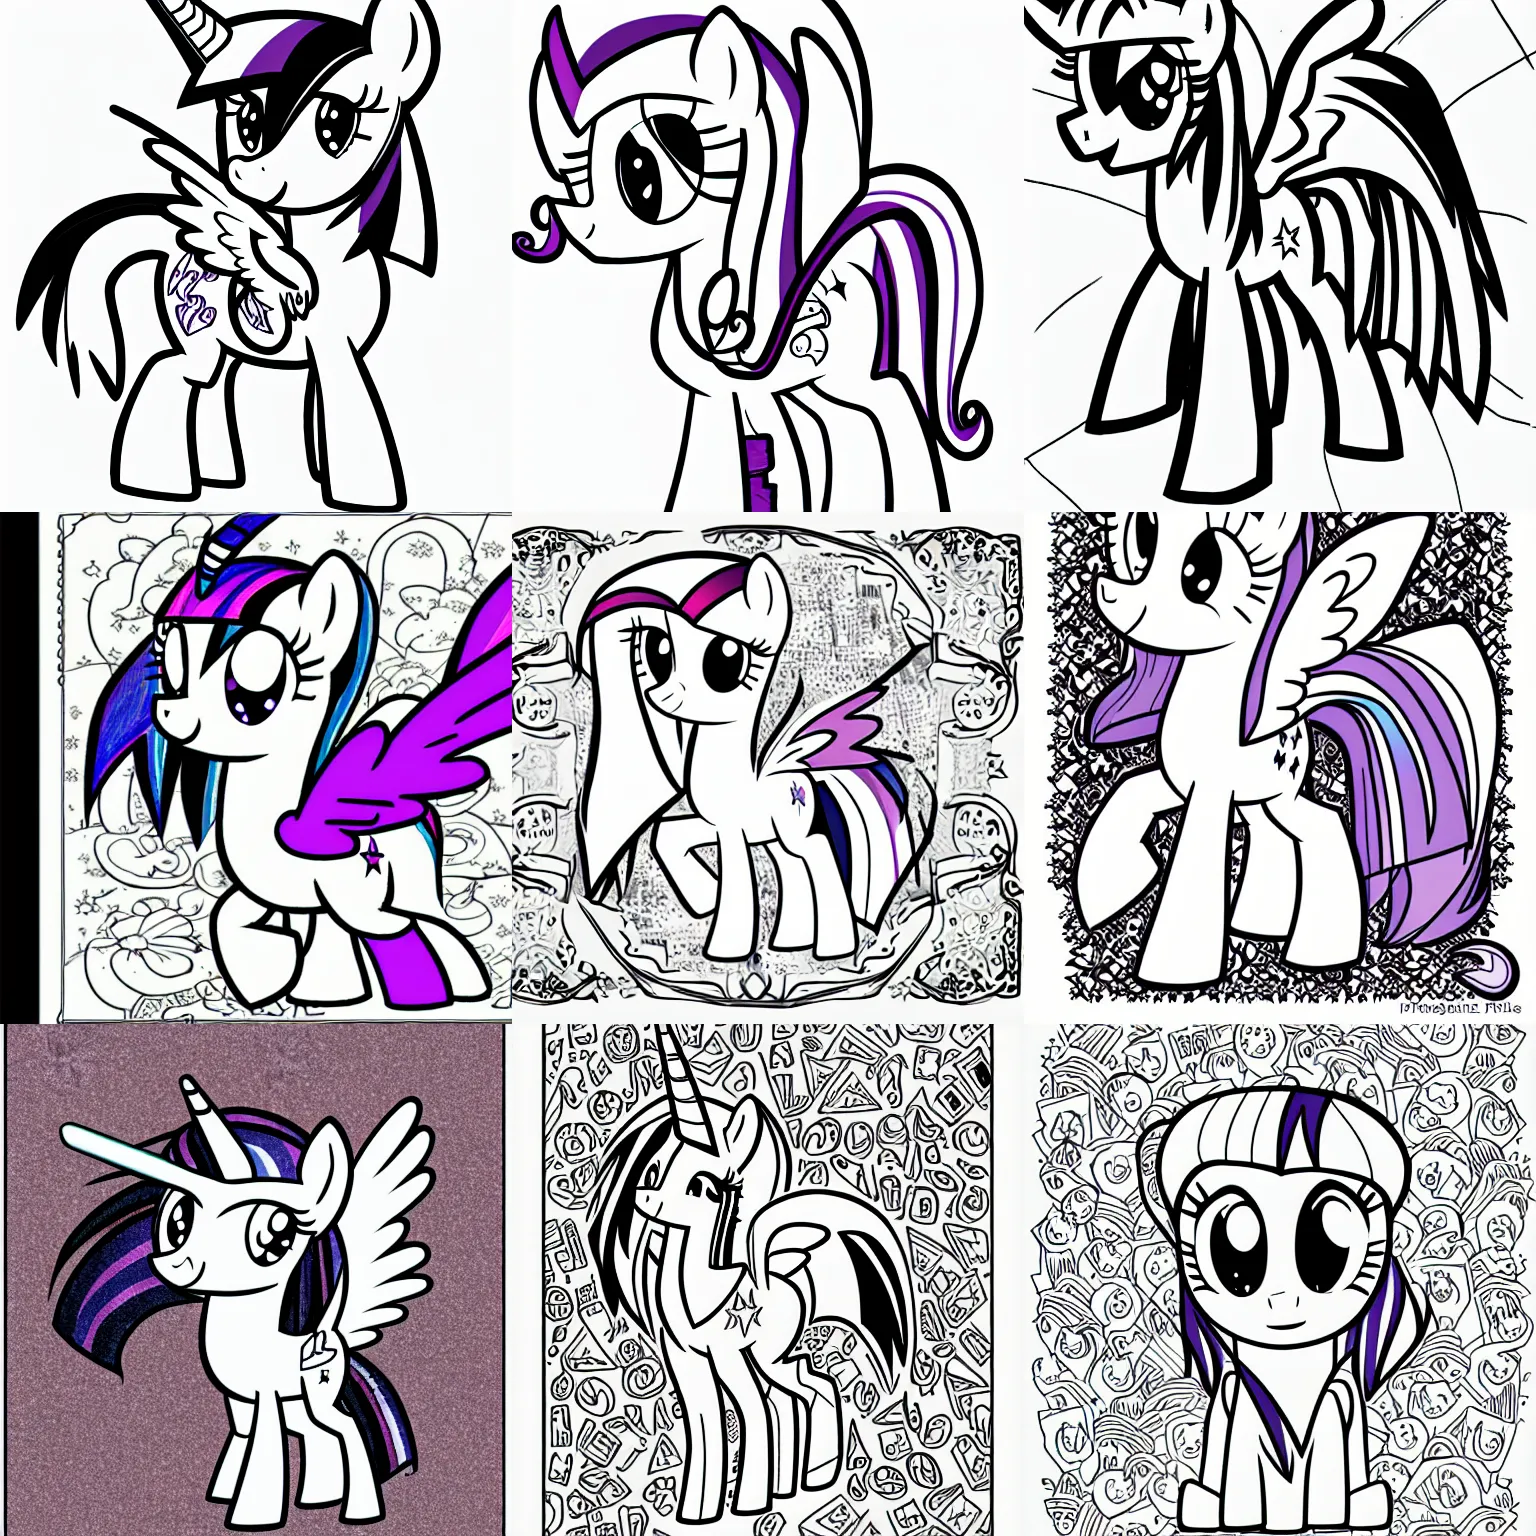 Prompt: Twilight Sparkle from My Little Pony: Friendship is Magic, uncolored black and white page from a coloring book, manga line art